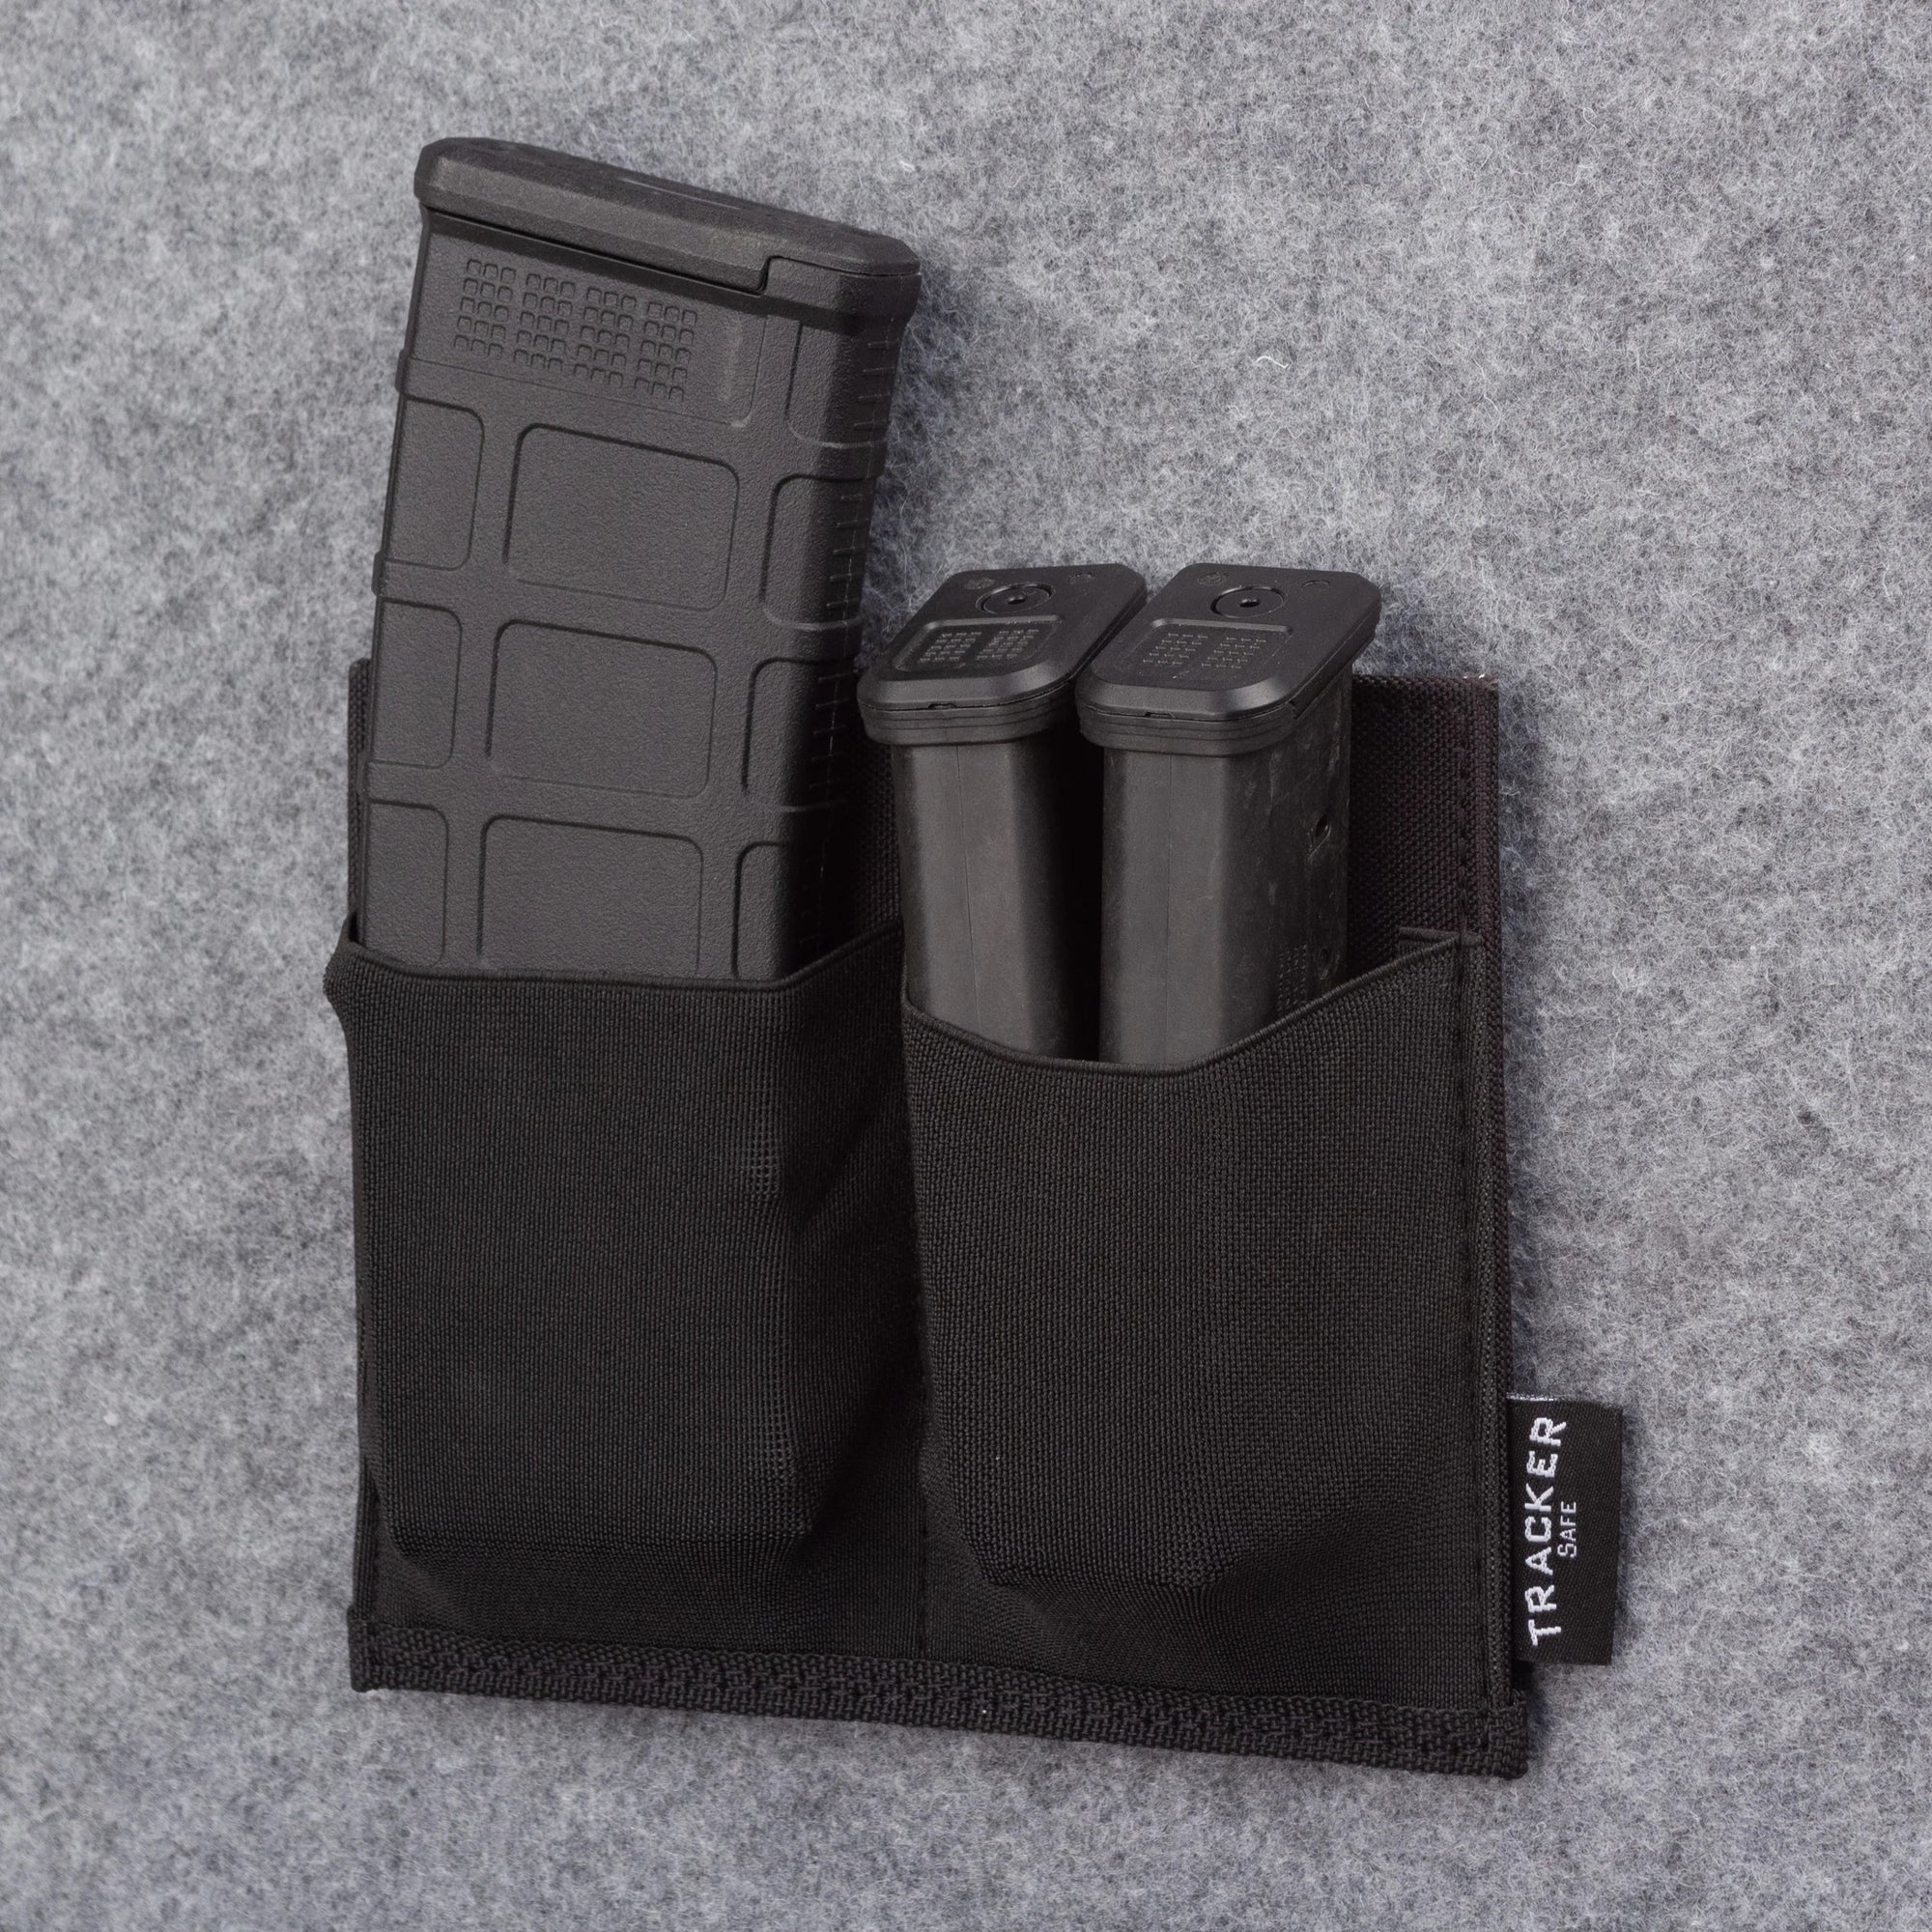 Tracker PE2 Pocket Elastic 2 Mag Holder With Mags